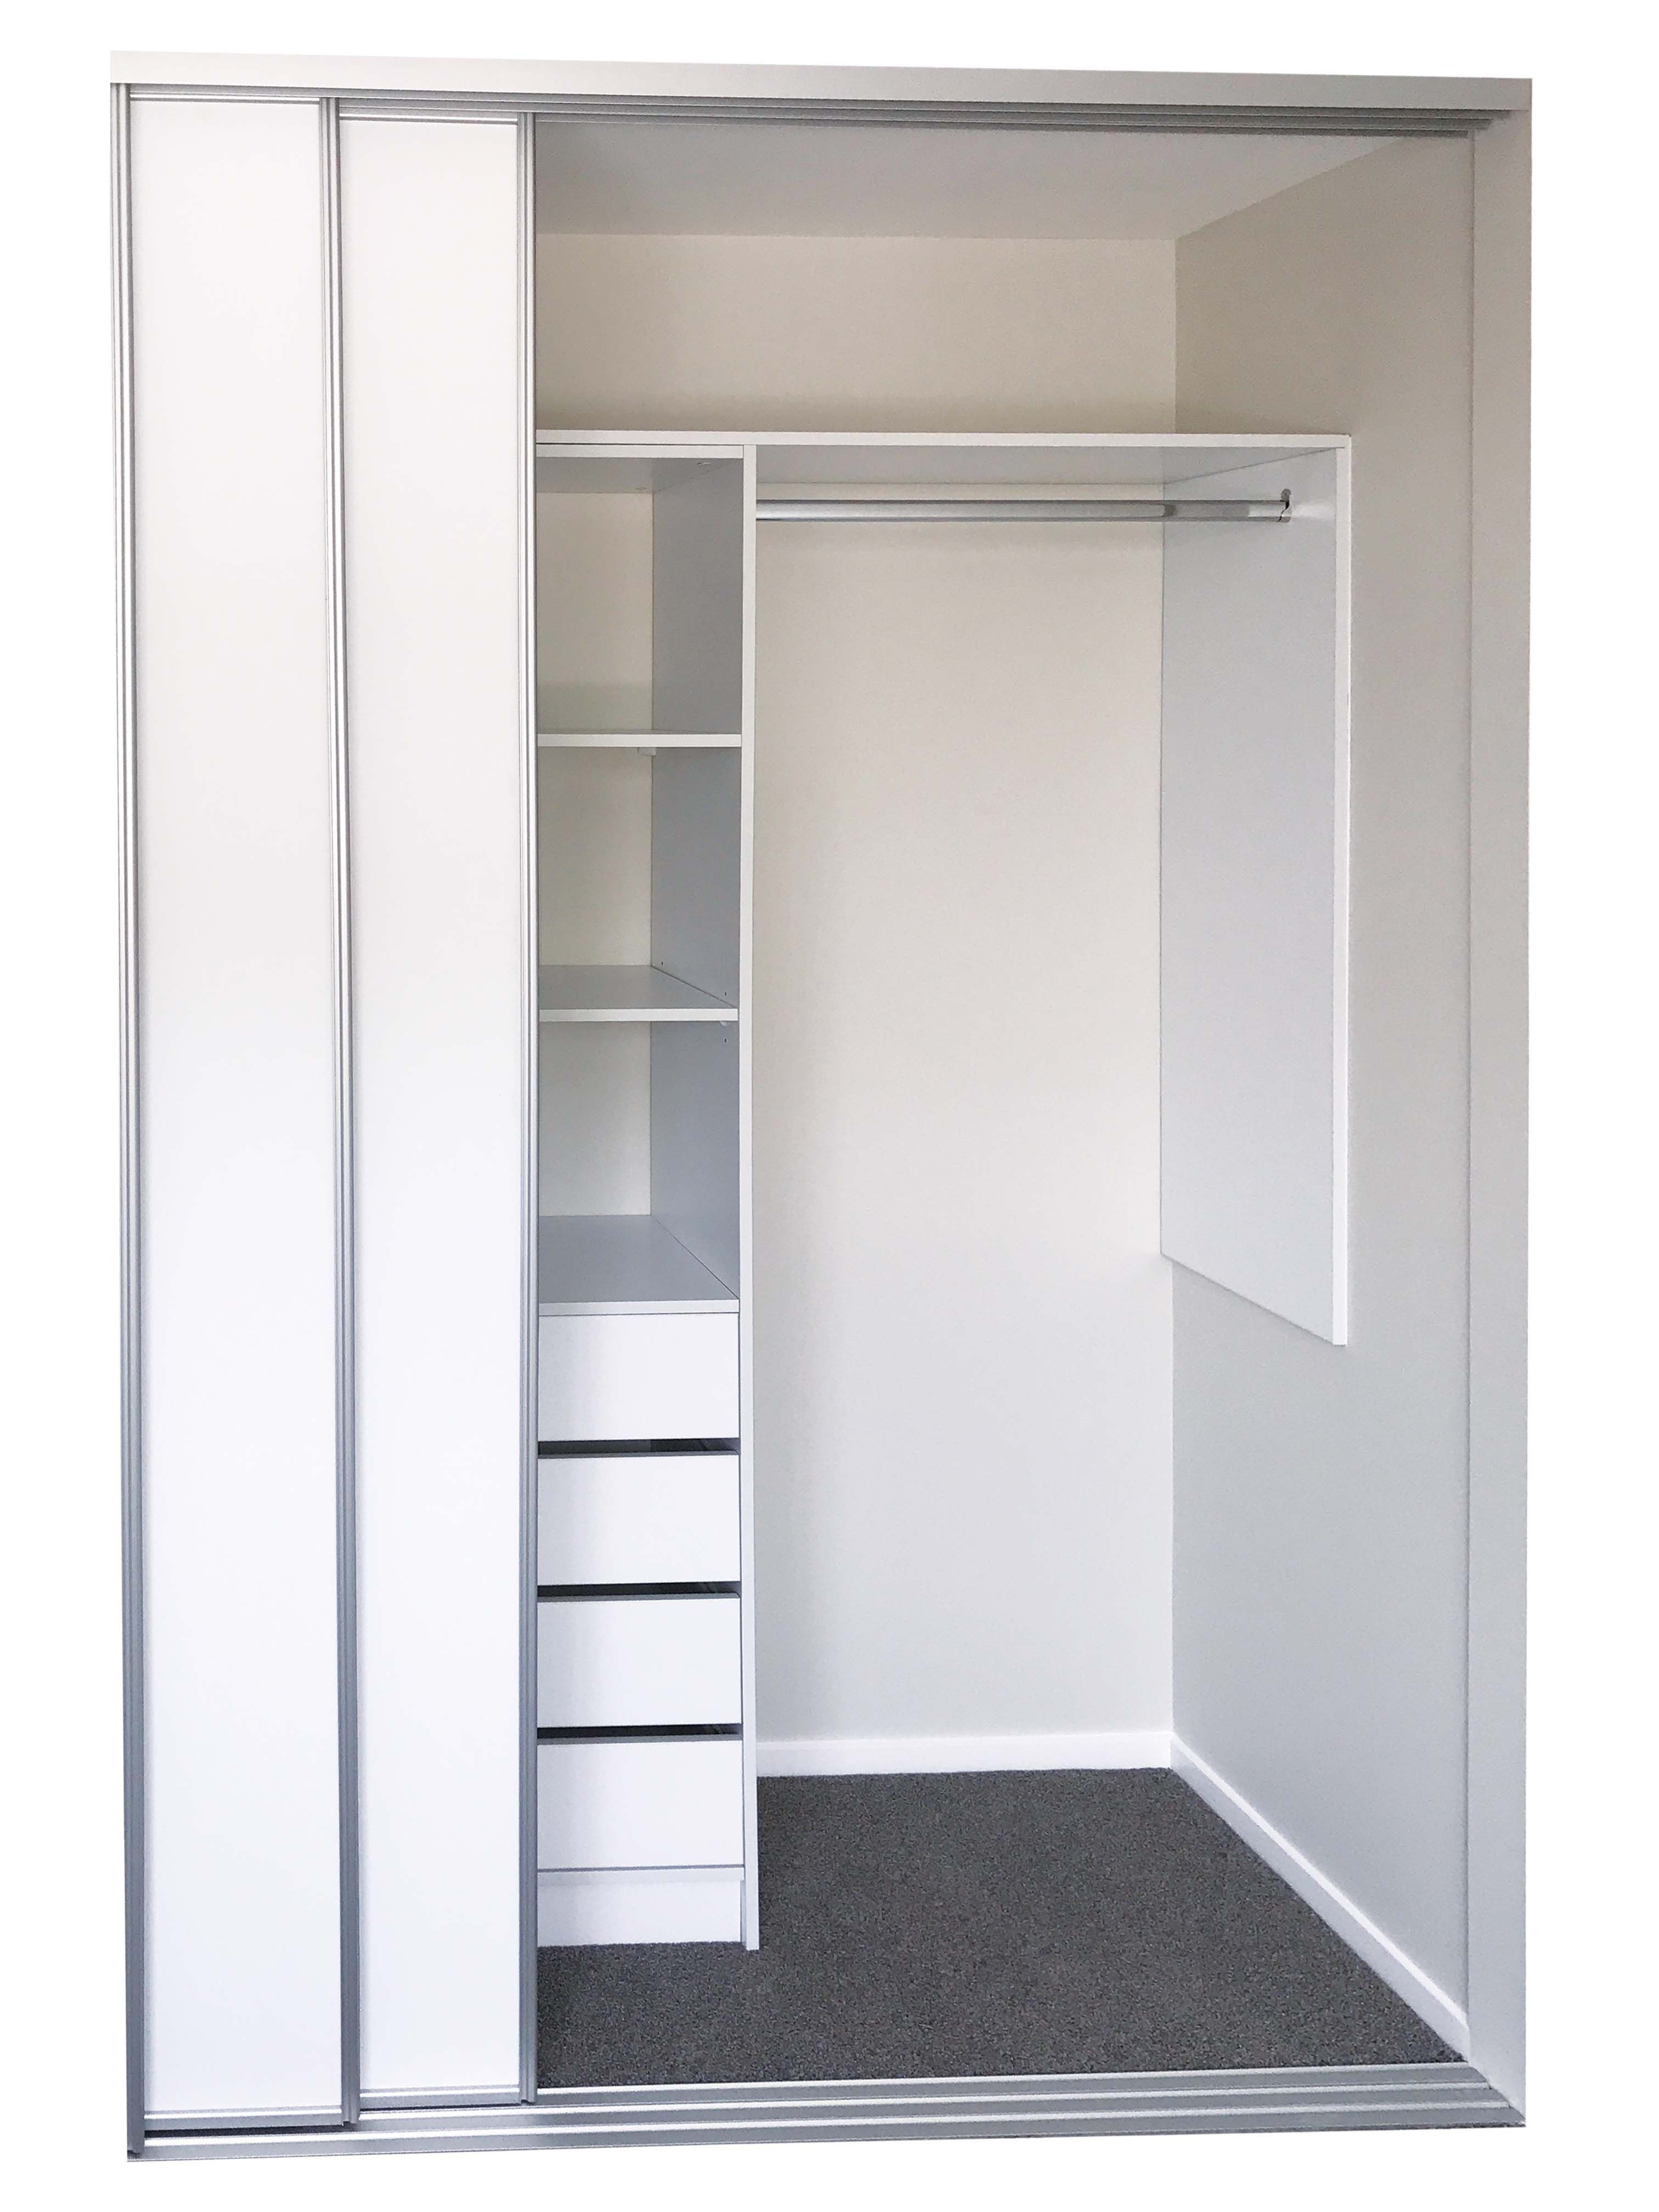 Genesis Modular Floor Standing Wardrobe Shelving | Showerwell Home Products For Wardrobes With 3 Shelving Towers (View 2 of 15)